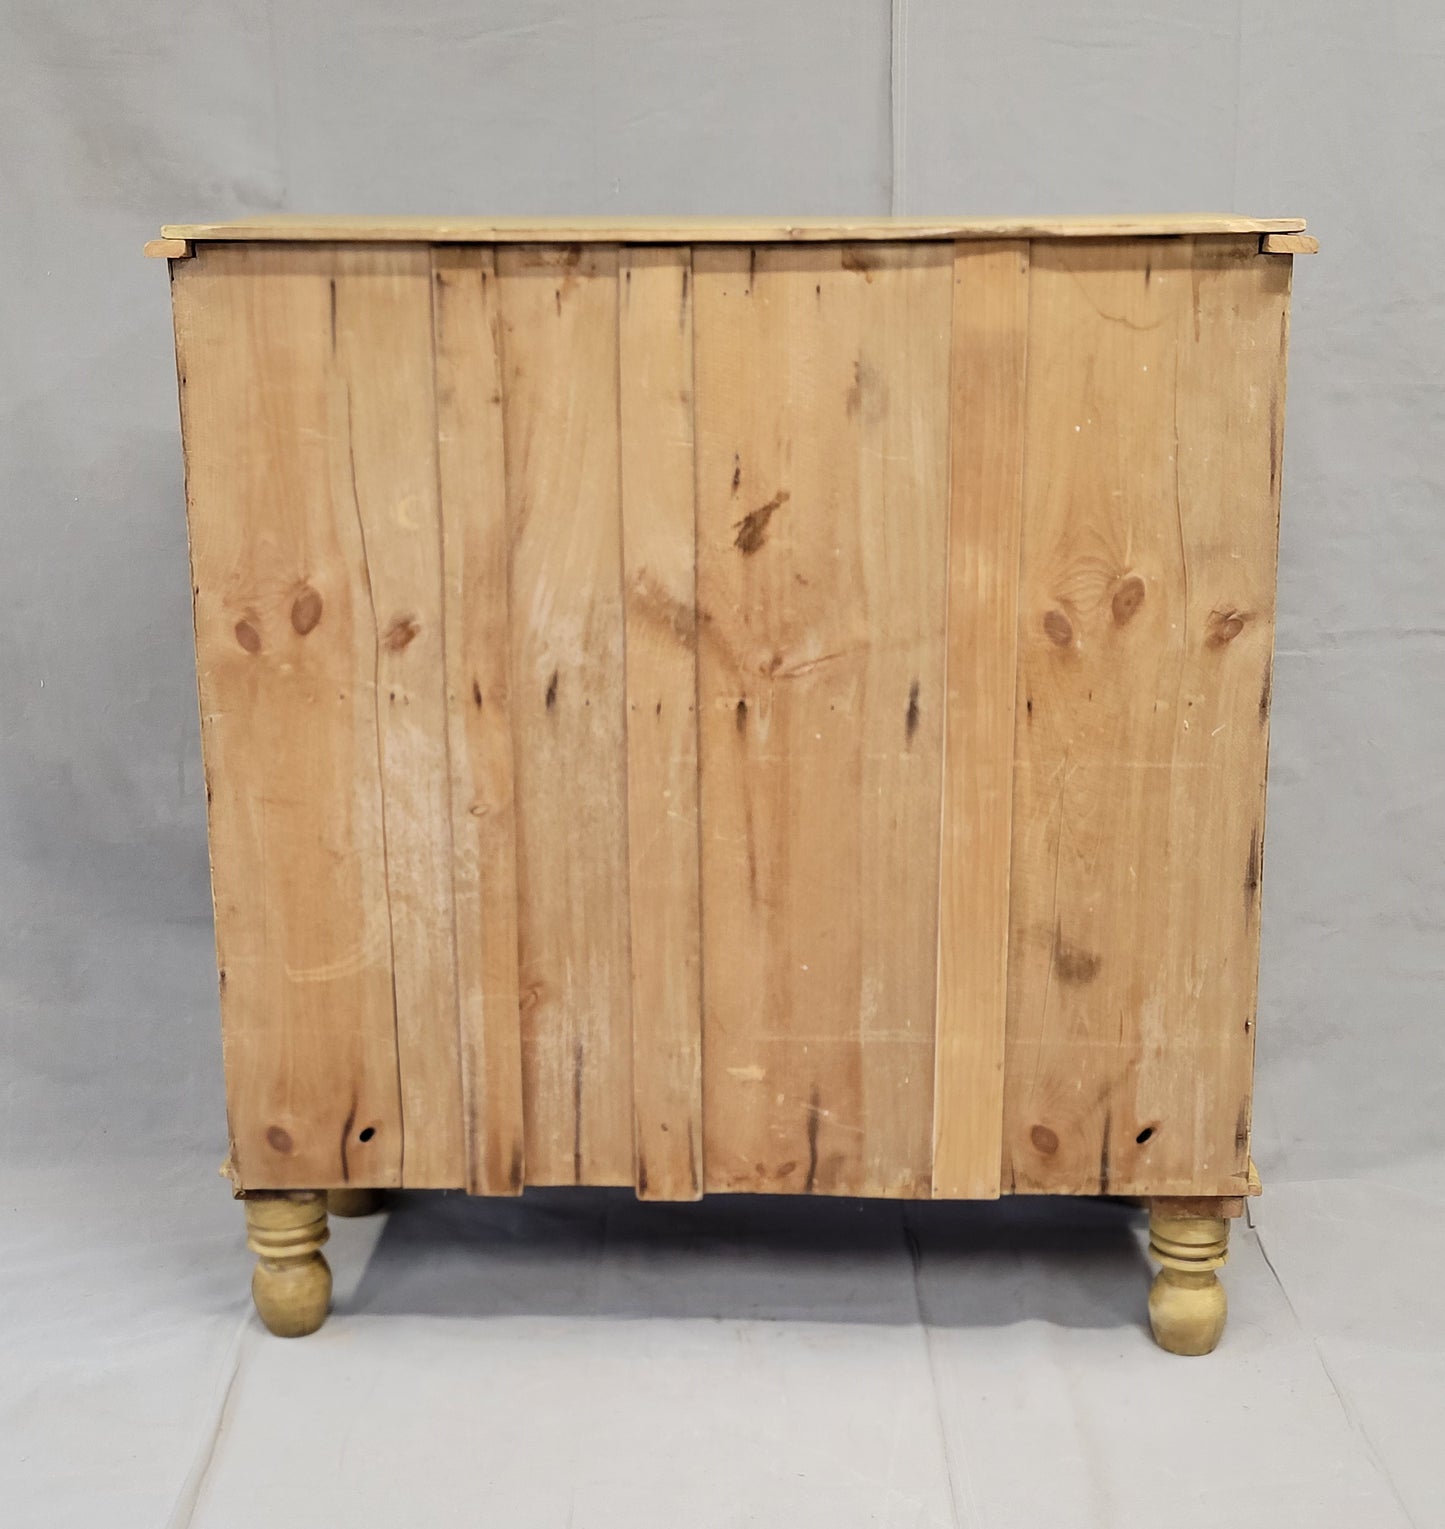 Antique English Edwardian Circa 1900 Painted Pine Dresser Chest of Drawers With Turned Feet